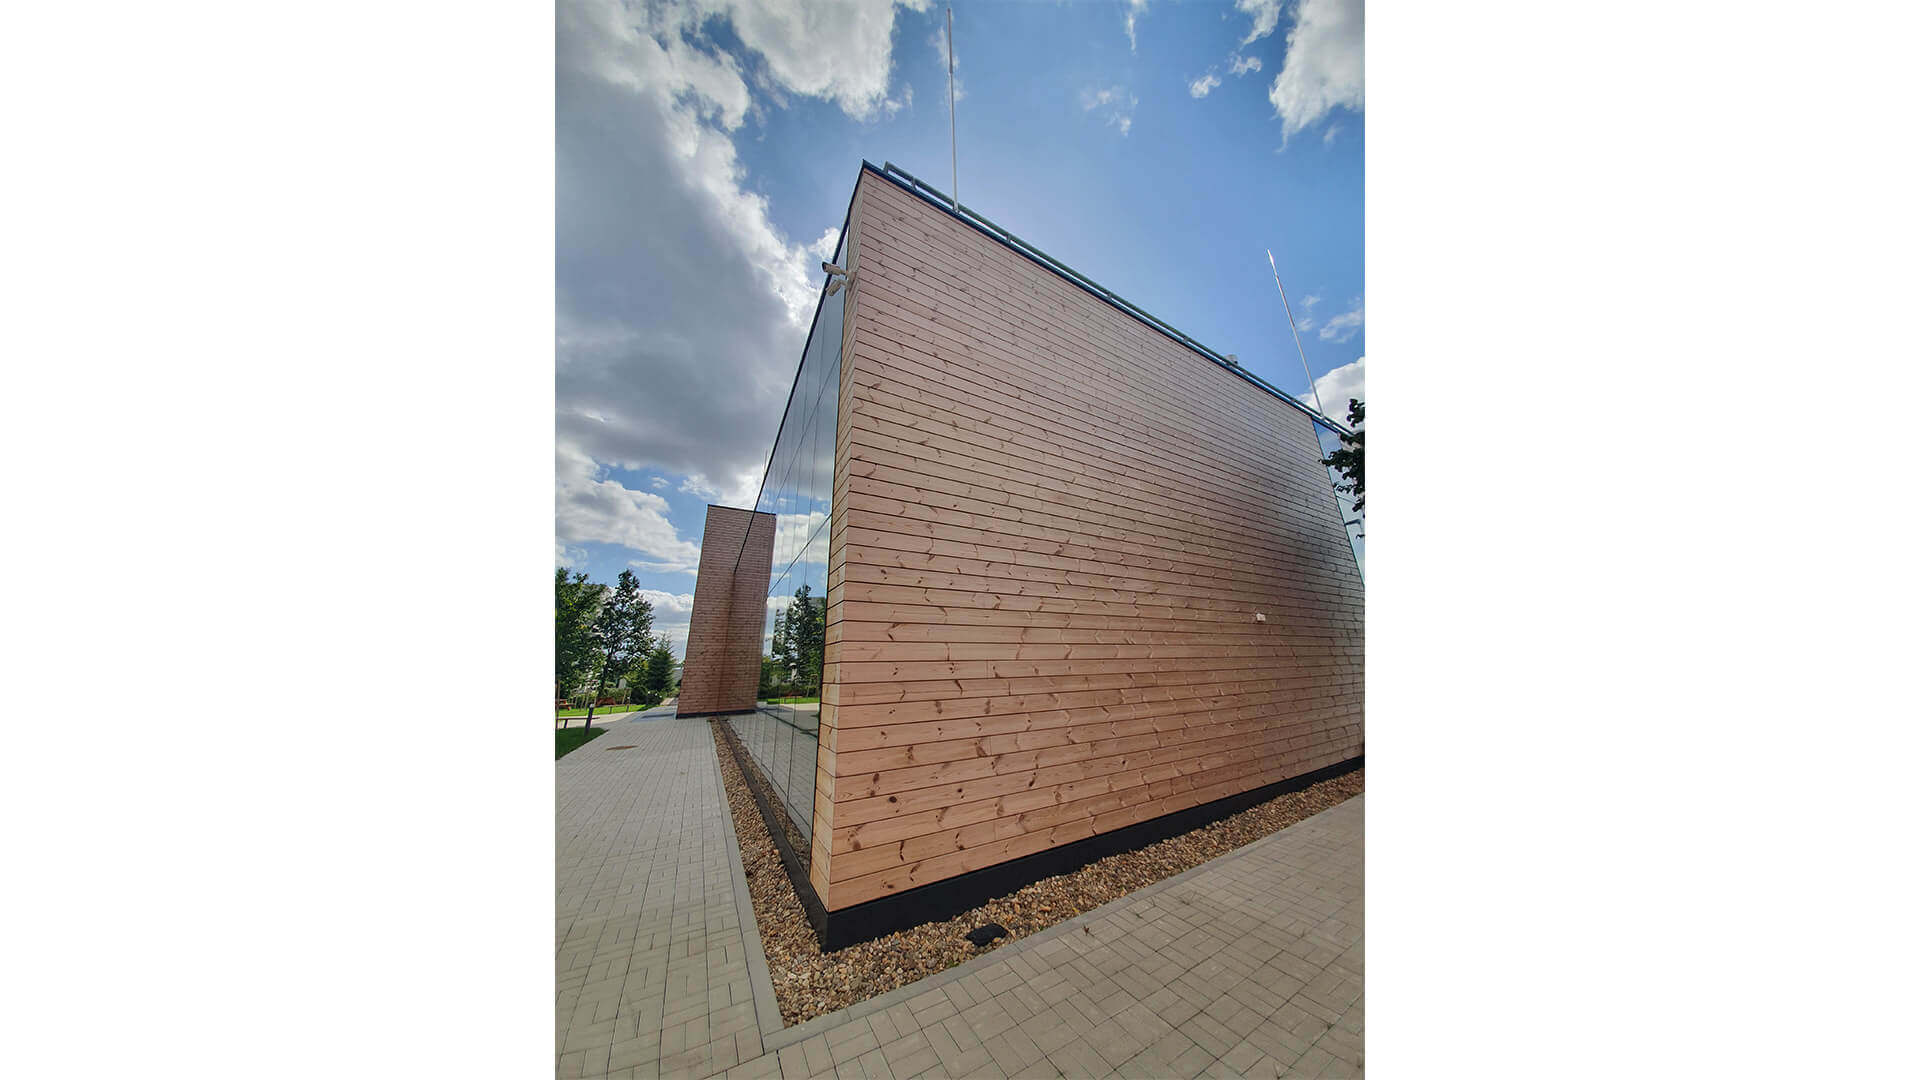 Lunawood thermowood facade is sustainable